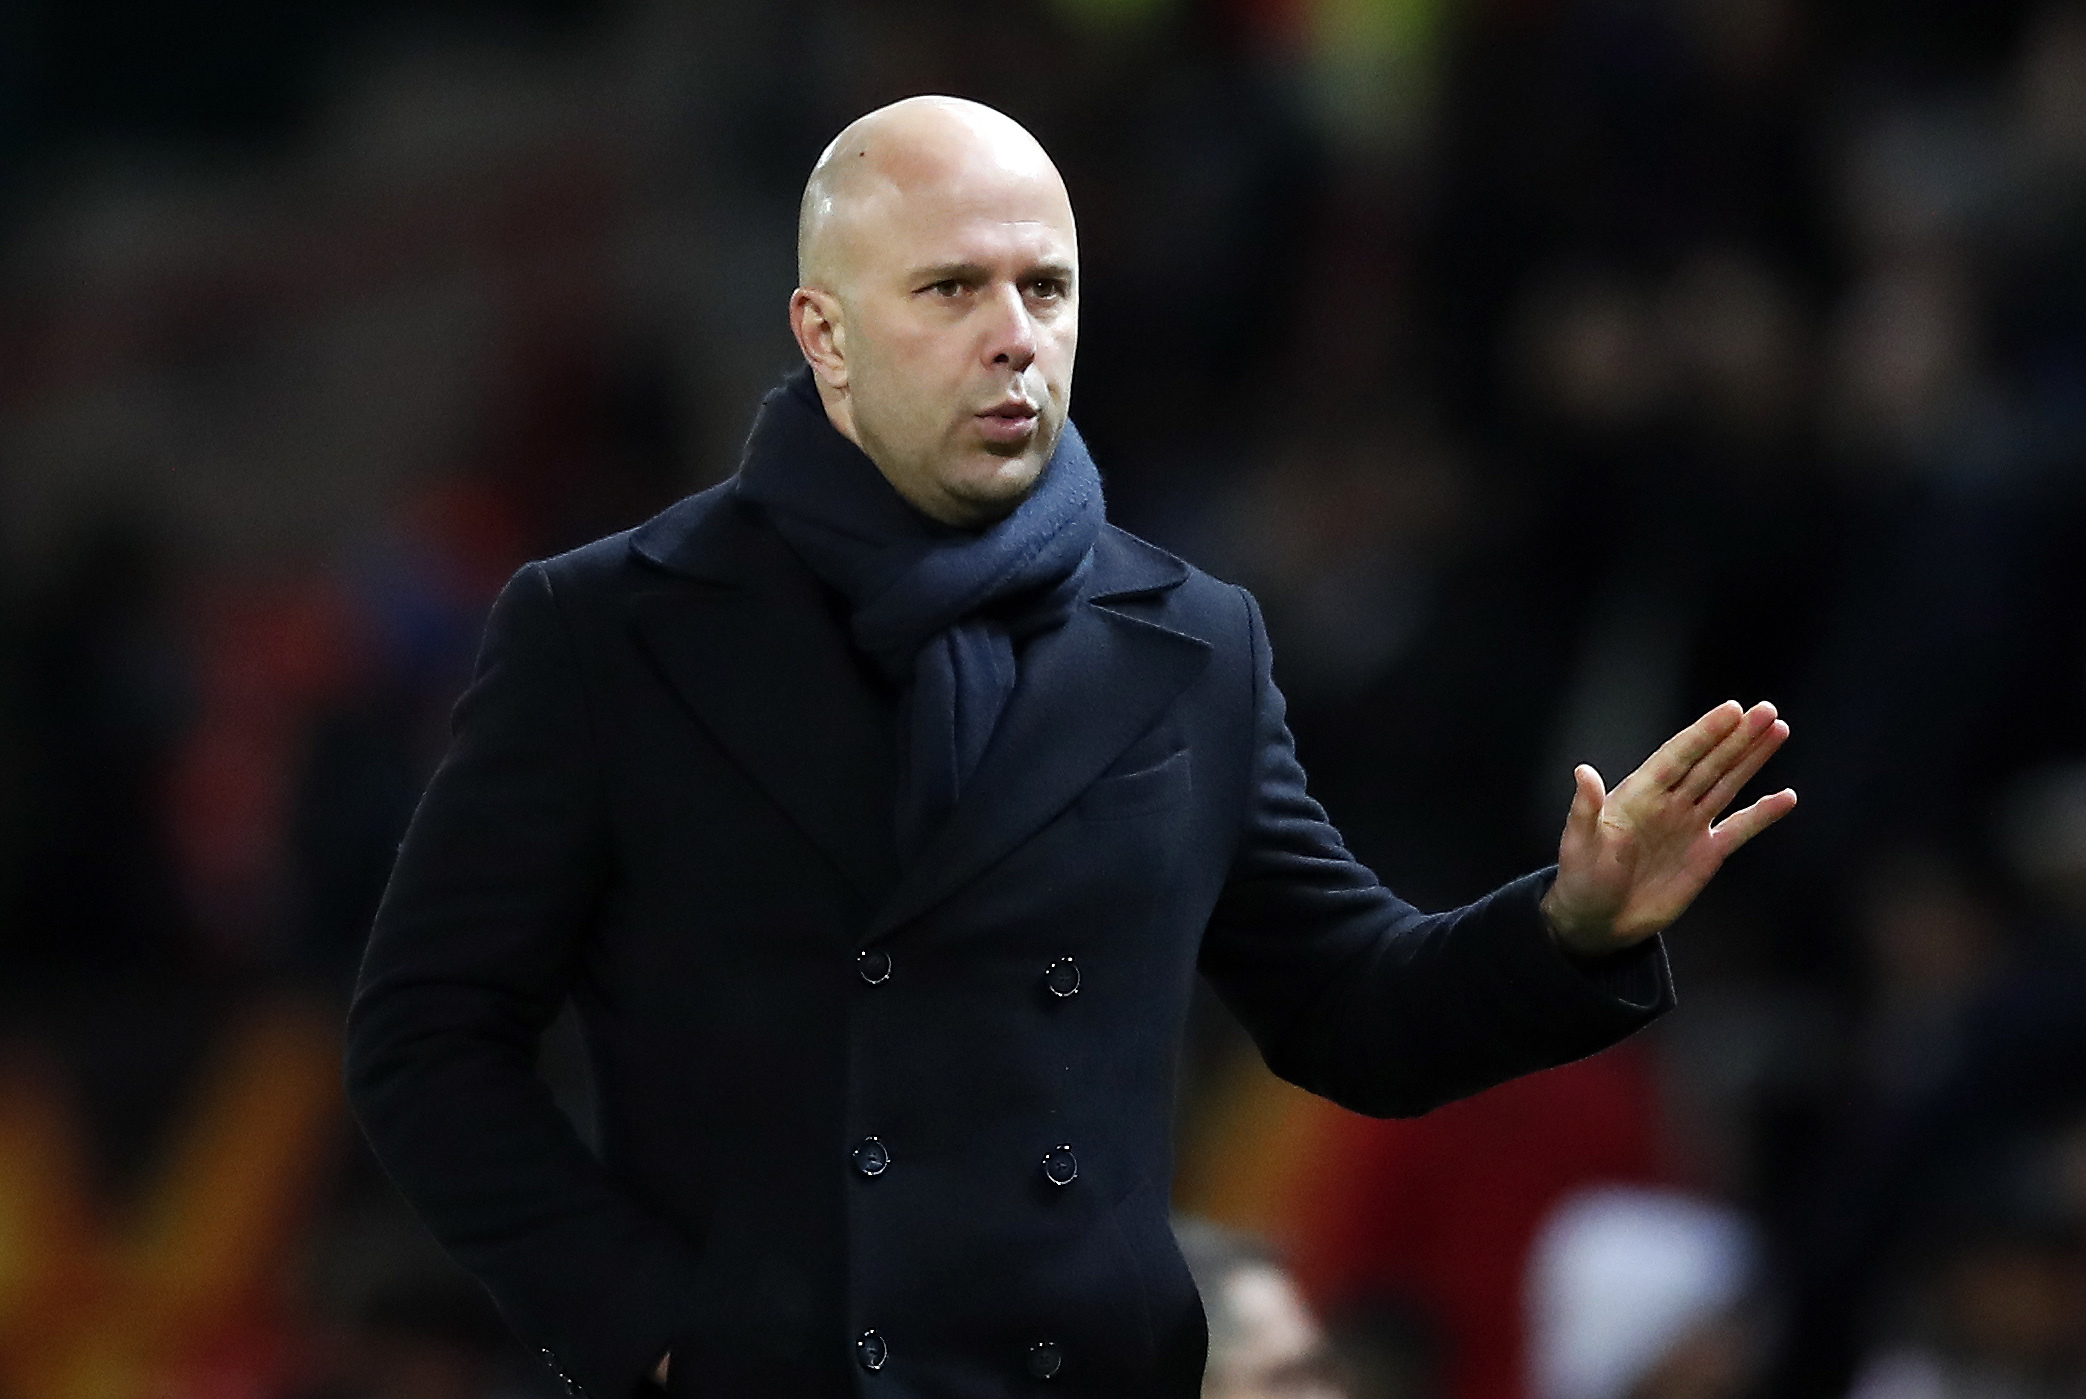 Feyenoord manager Arne Slot ruled himself out of the running for the Tottenham job